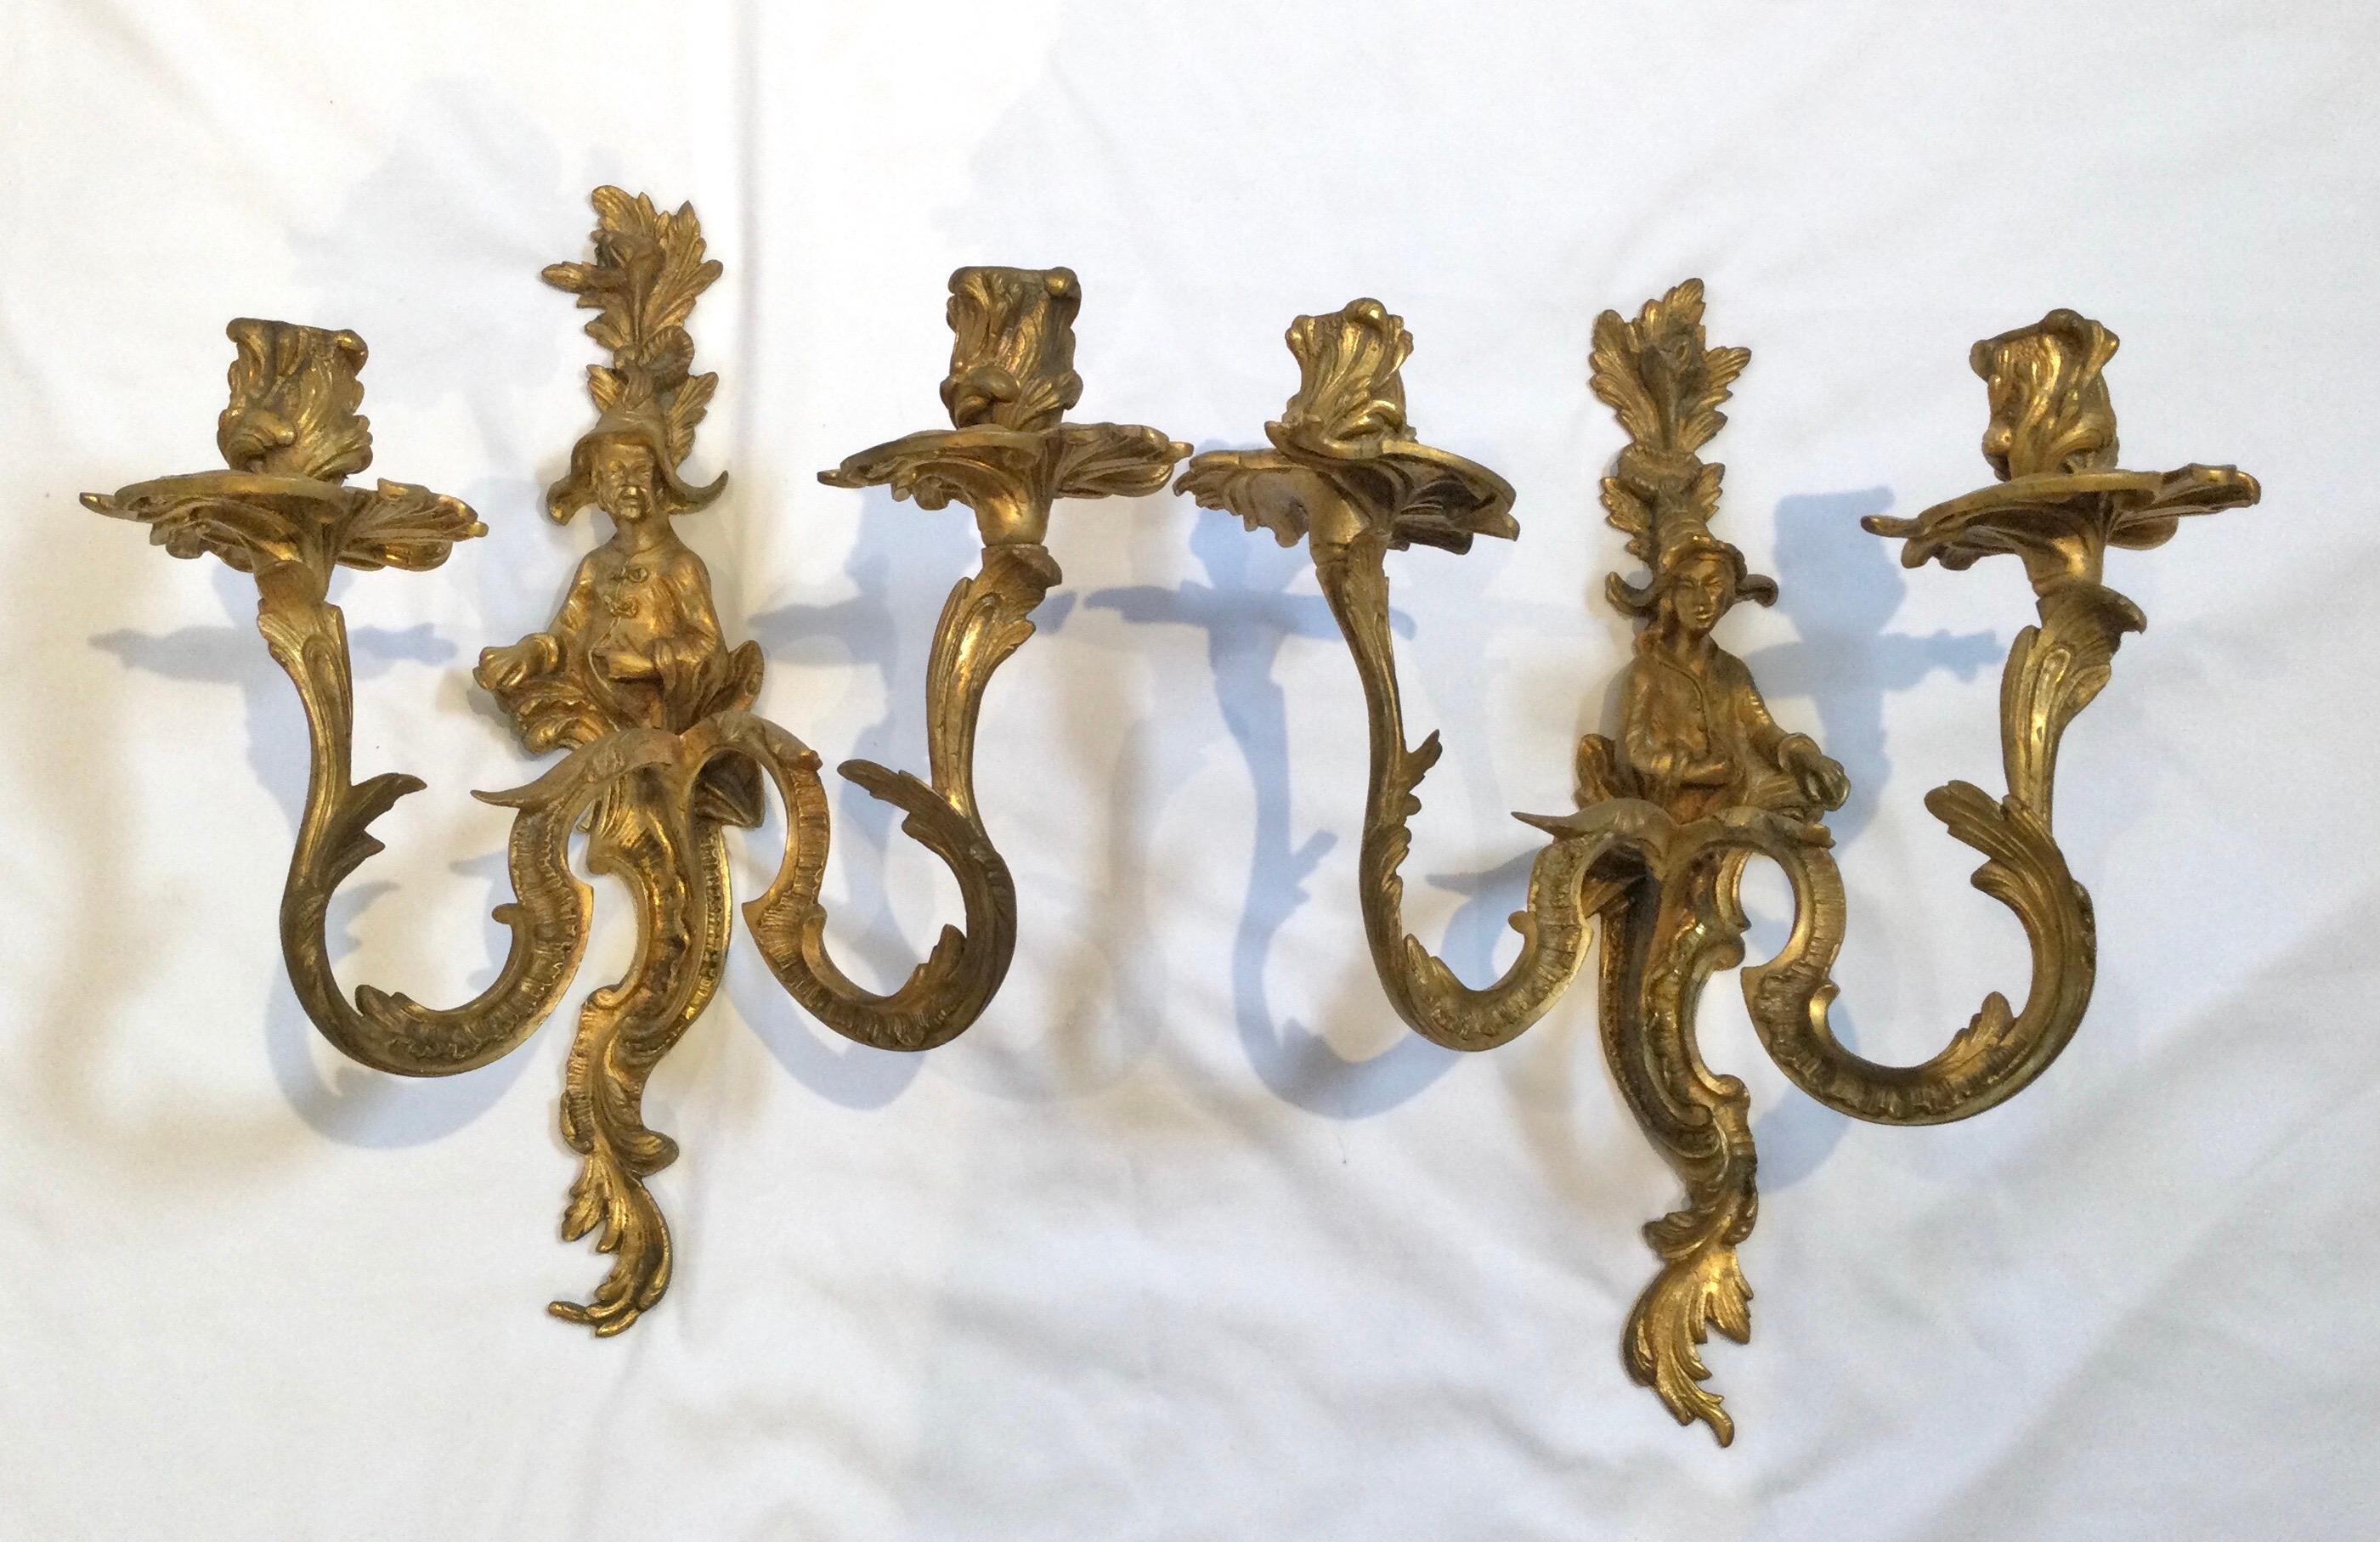 Pair of double candle light antique gilt bronze figural sconces. A fine pair 19th century figural French gilt bronze chinoiserie sconces in original condition with some tarnishing from age. Measures: 15